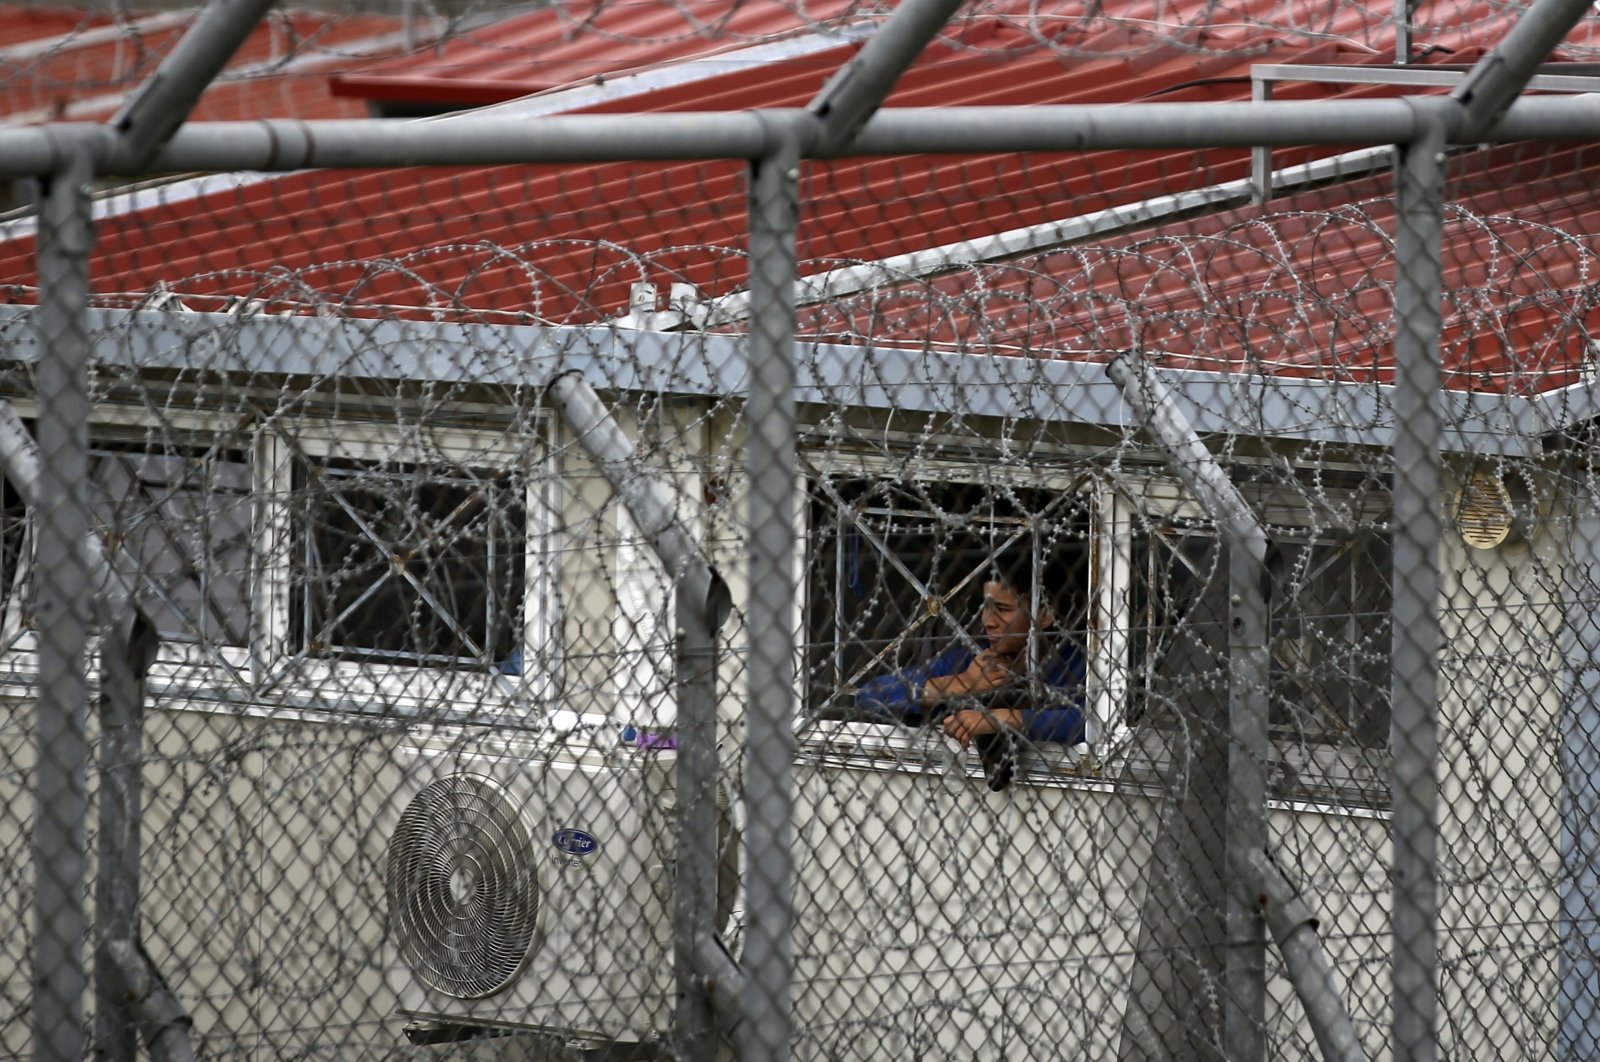 A migrant looks out from a detention center in the village of Fylakio, Evros region, near the Greek-Turkish border, March 8, 2020. (AP Photo)